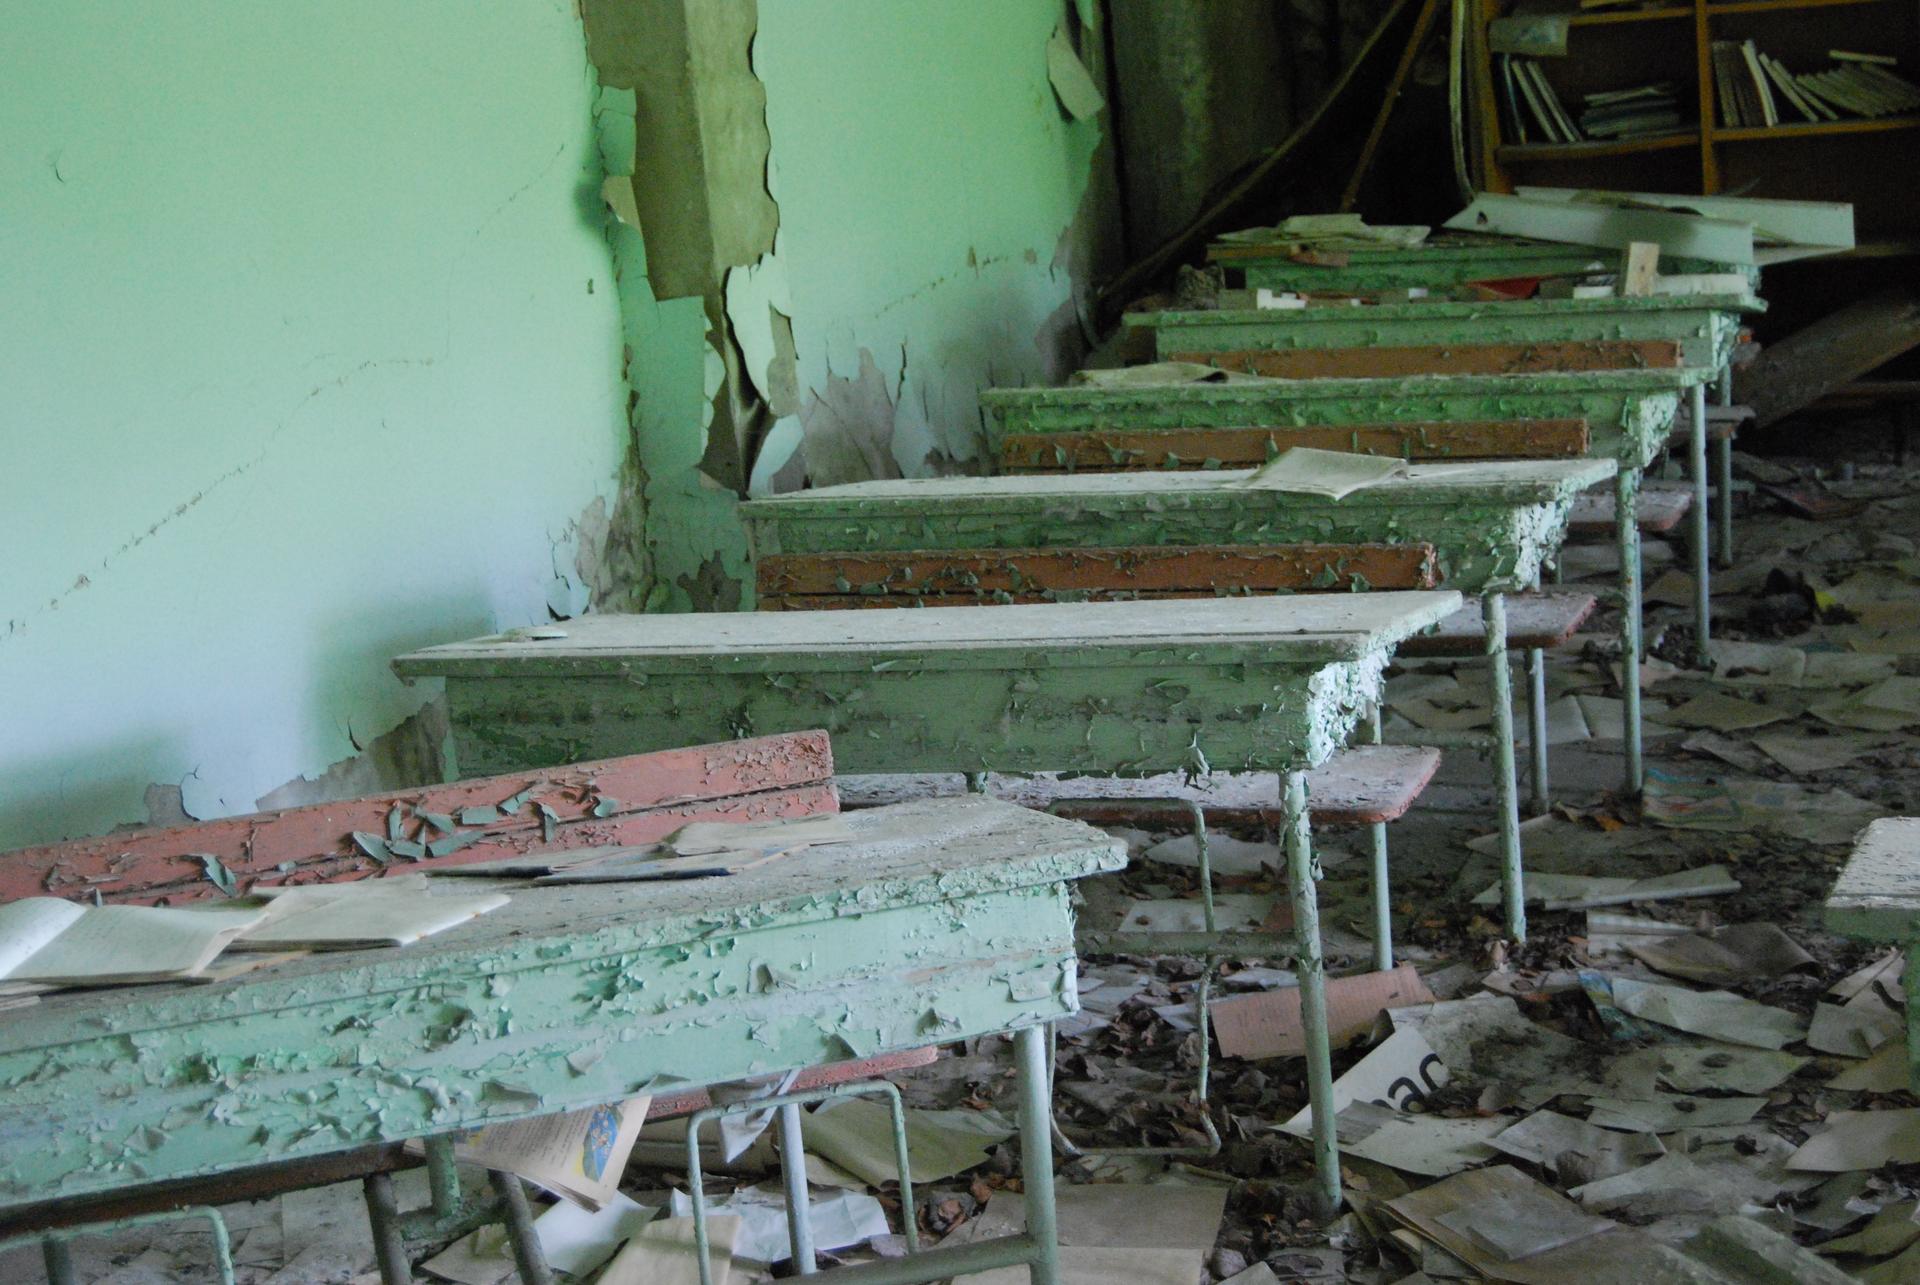 An abandoned classroom in the nearby town of Pripyat where most of the workers at the nuclear plant lived. The town was hastily abandoned the day after the Chernobyl disaster.